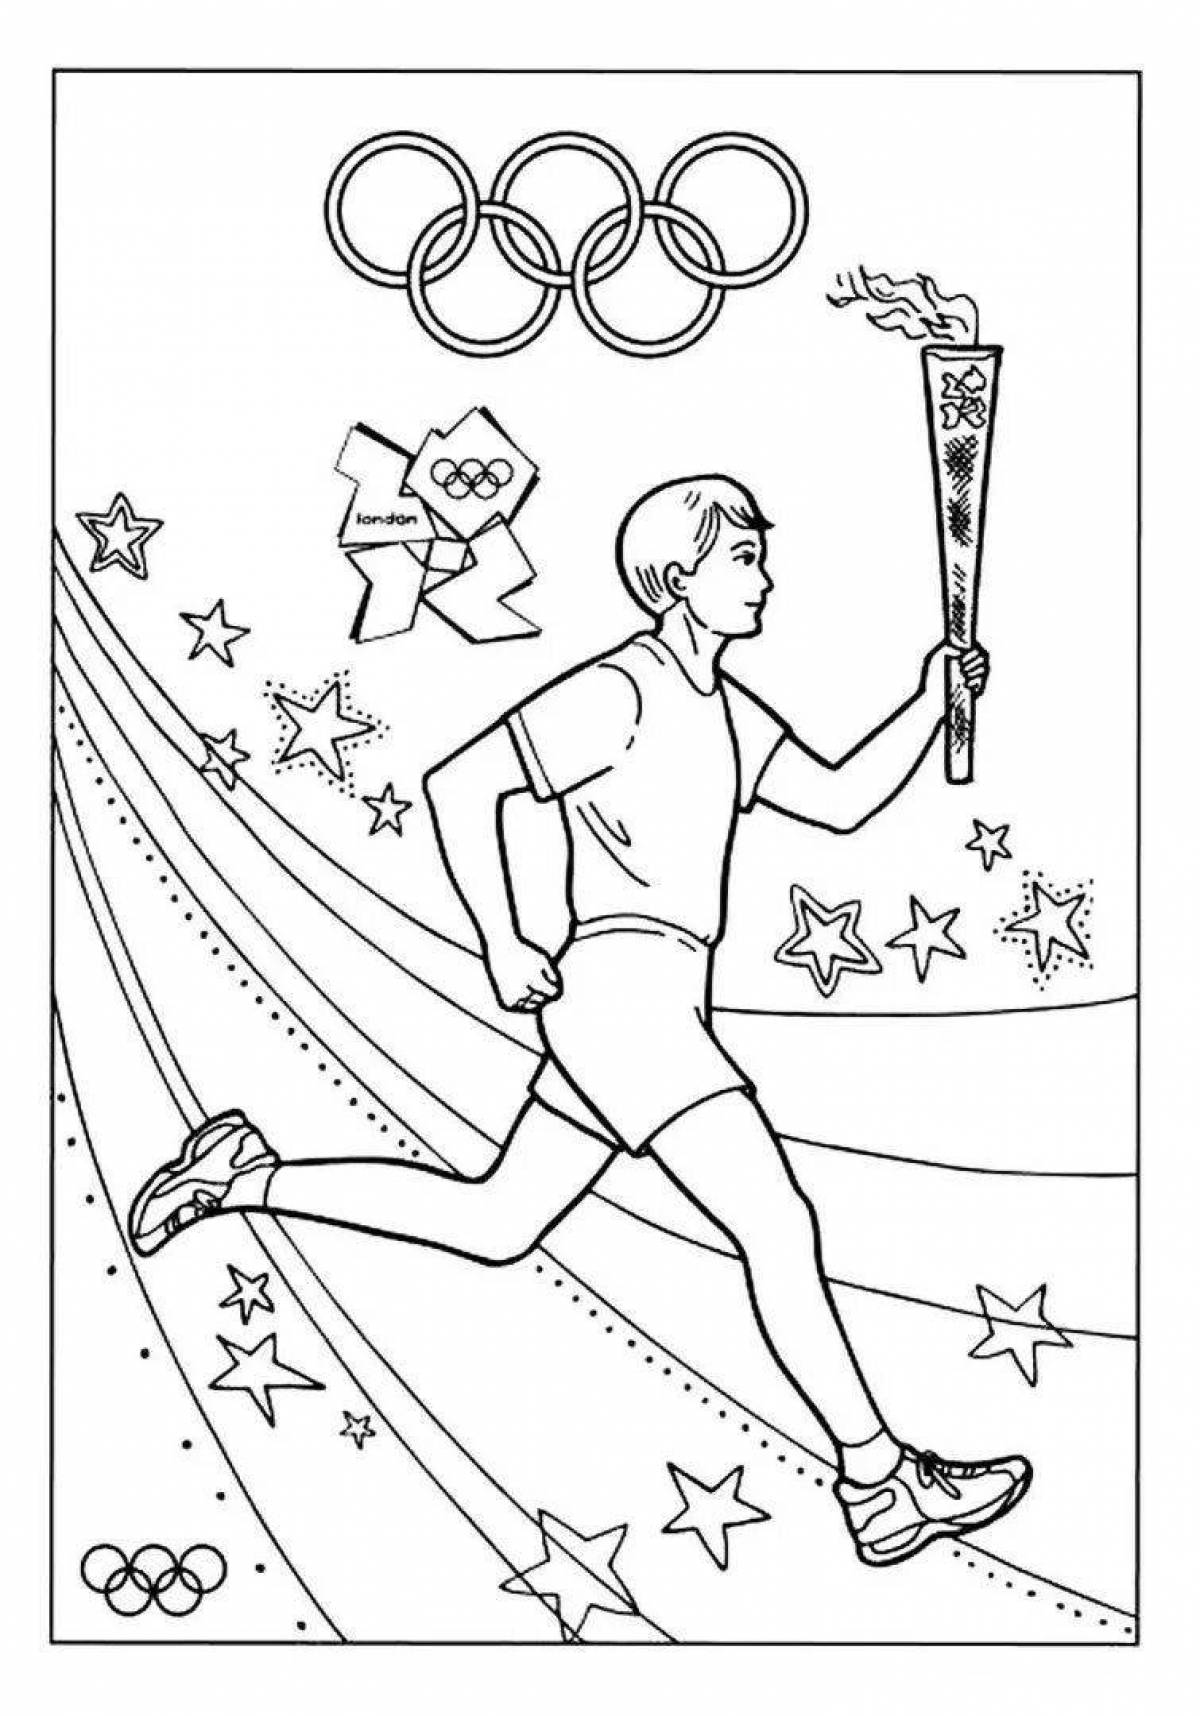 Lively coloring for children, olympic sports